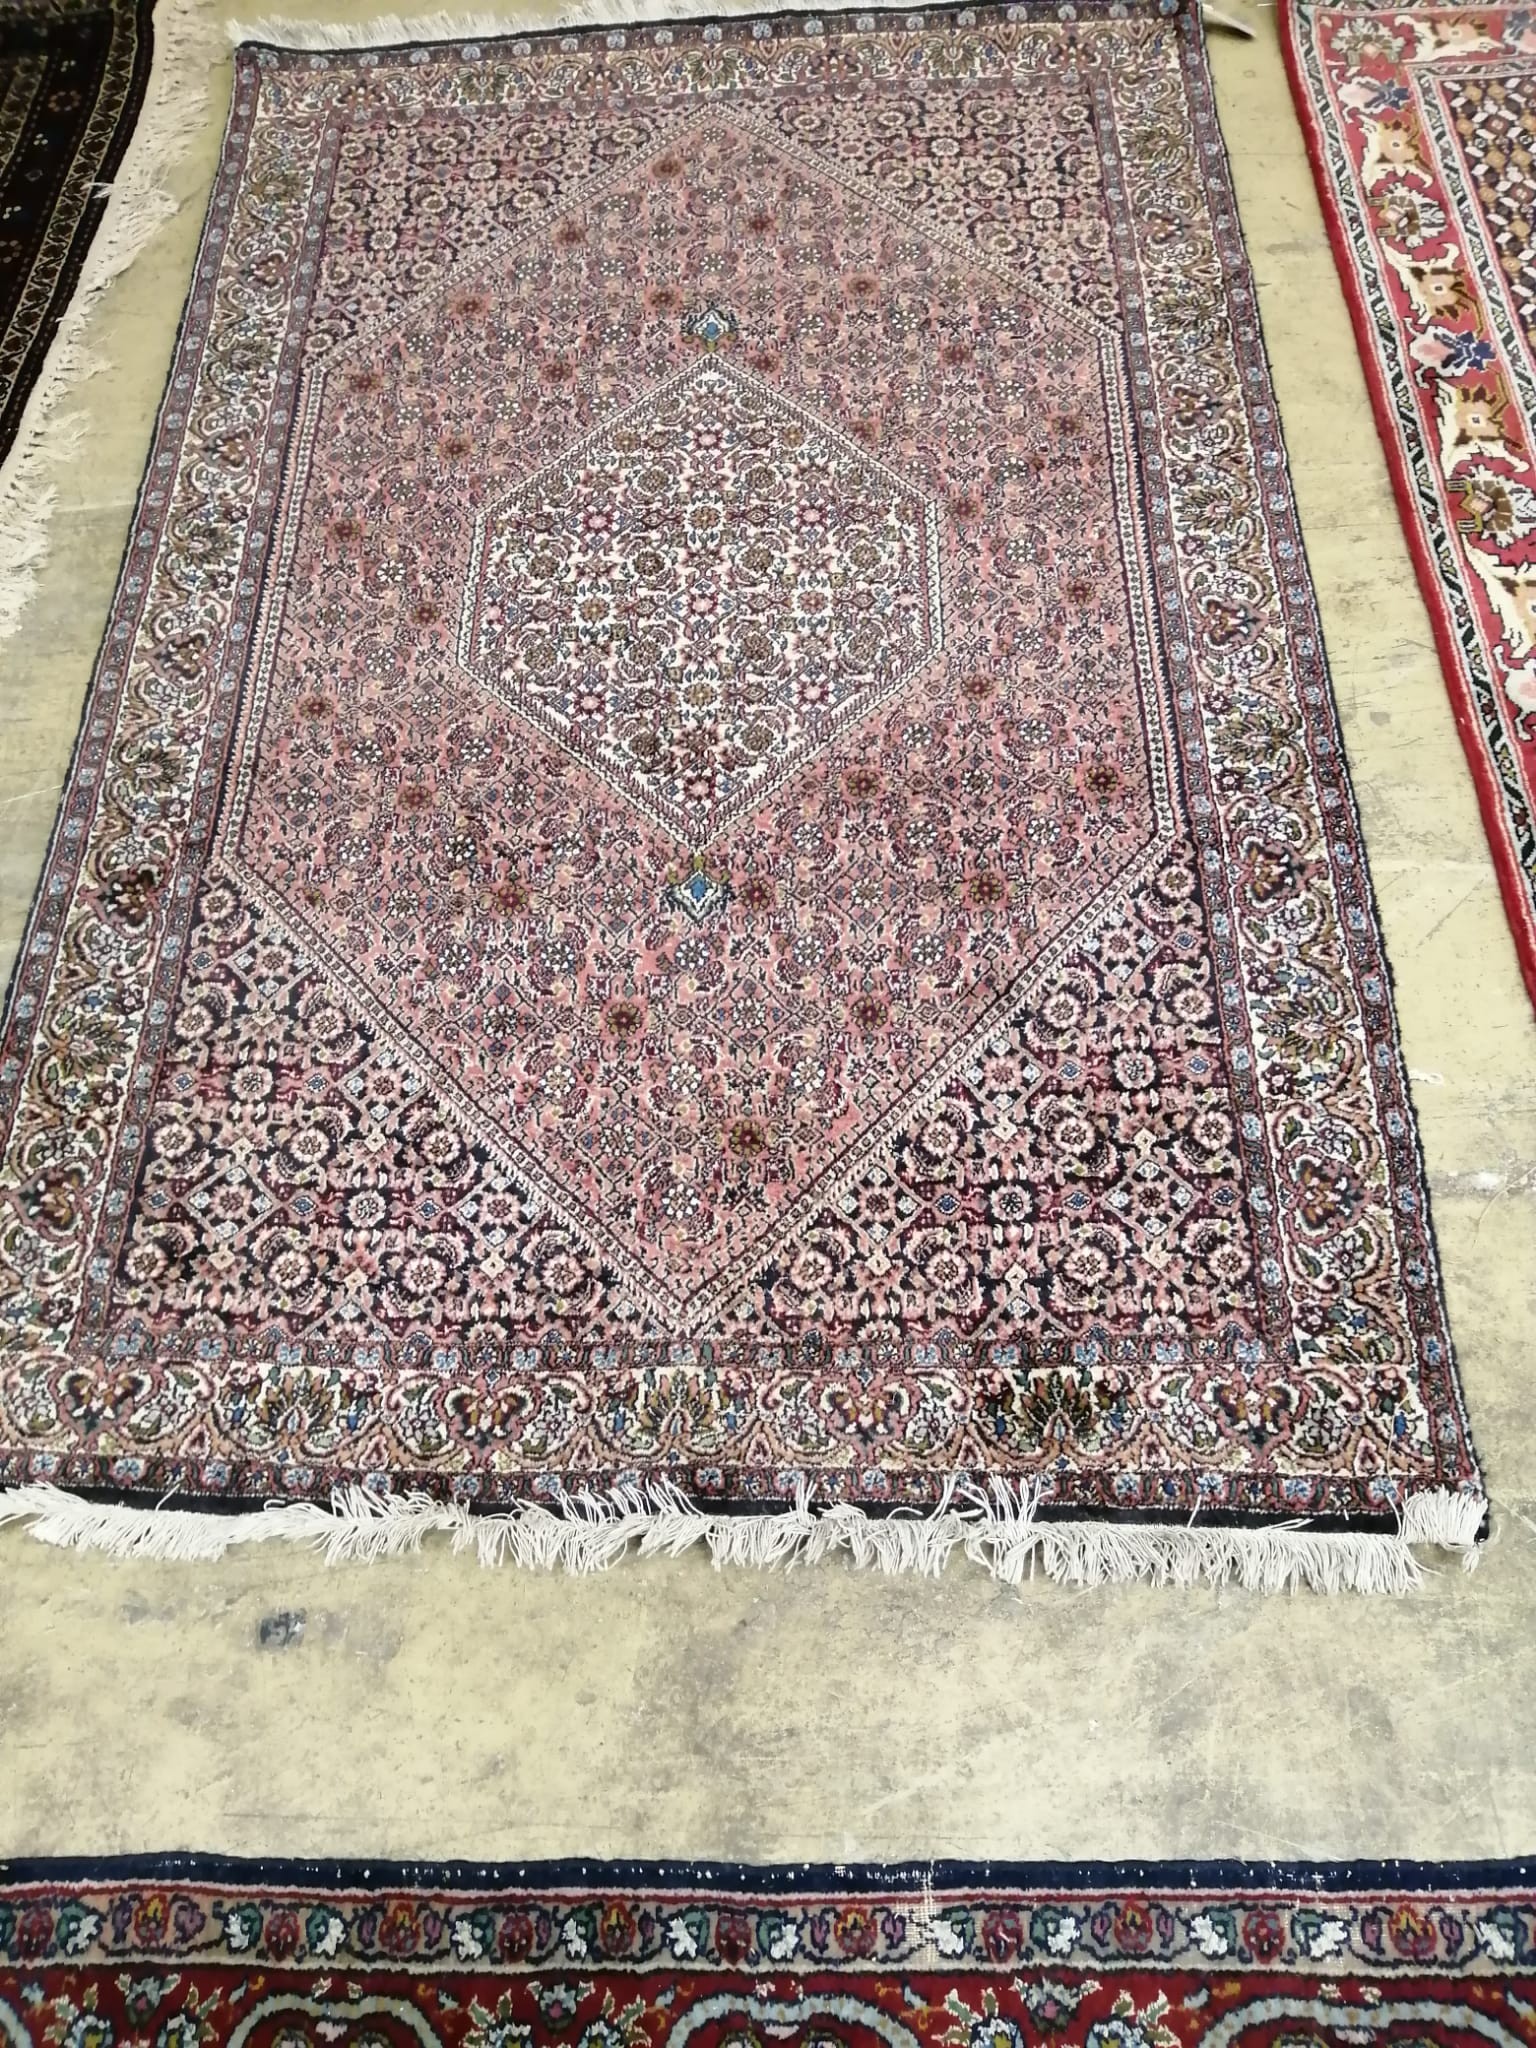 A North West Persian ivory ground rug, 170 x 112cm